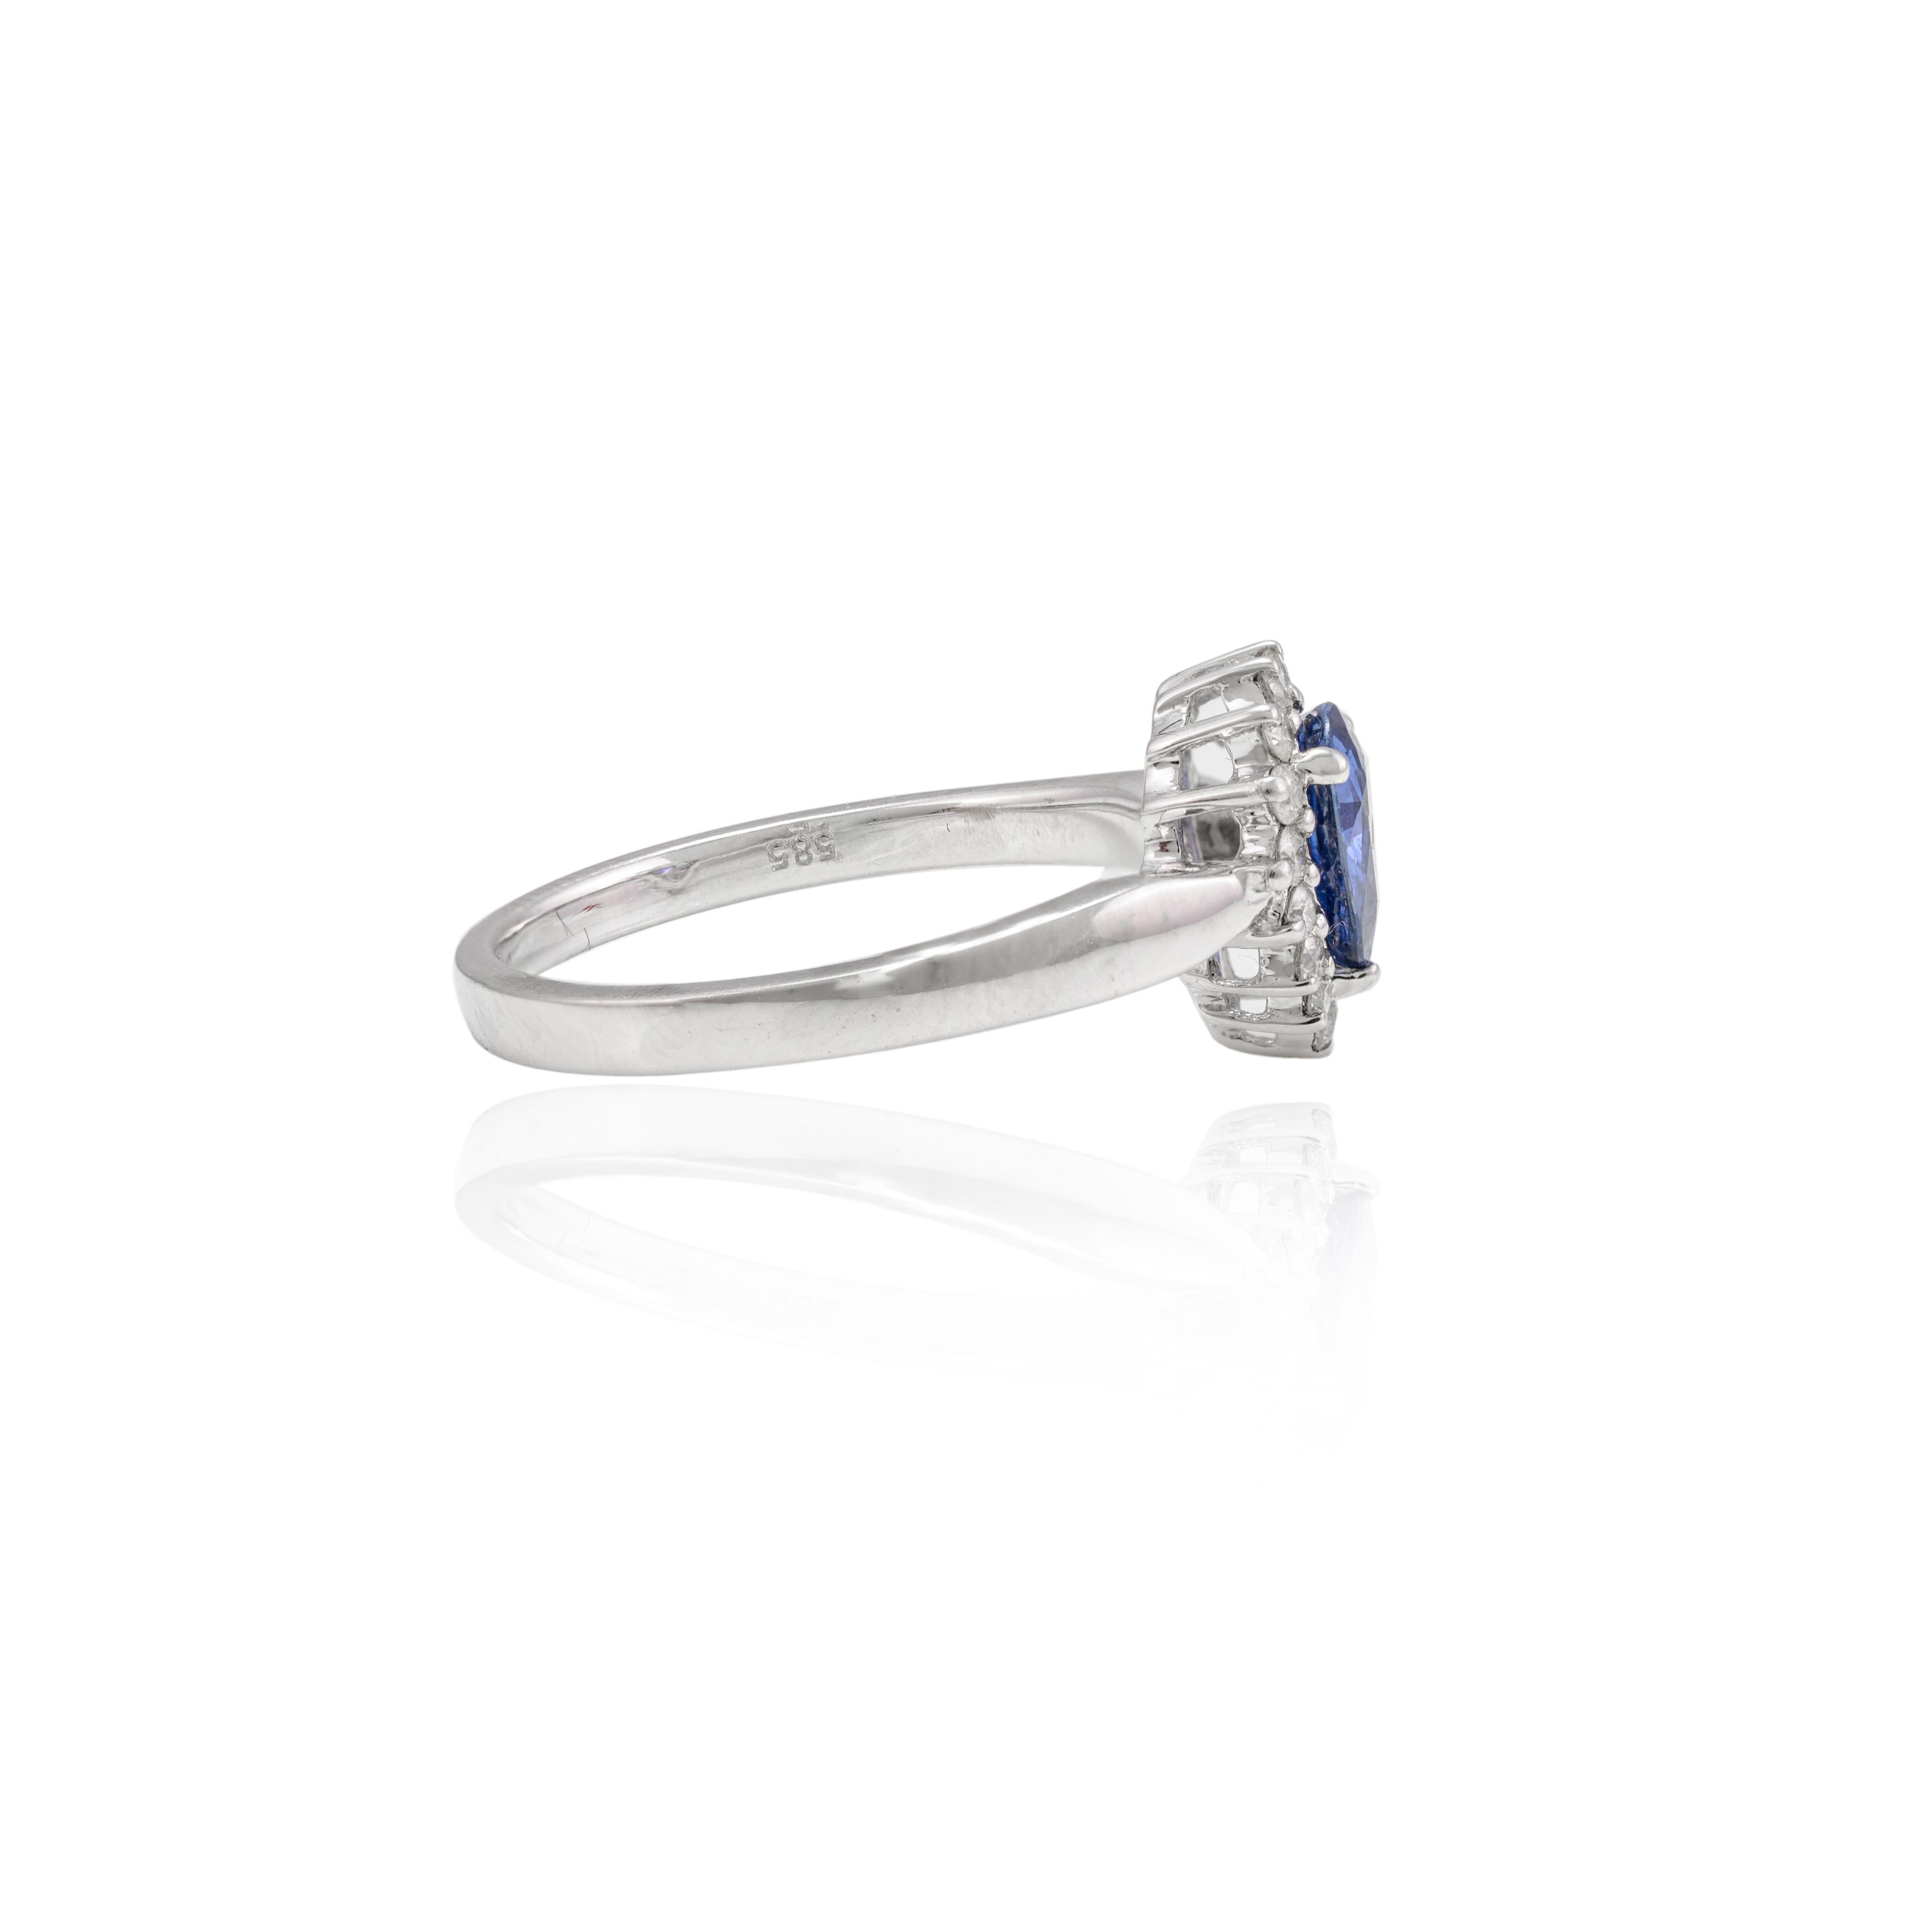 For Sale:  0.77 Carat Pear Cut Blue Sapphire and Diamond Halo Ring 14k Solid White Gold 3